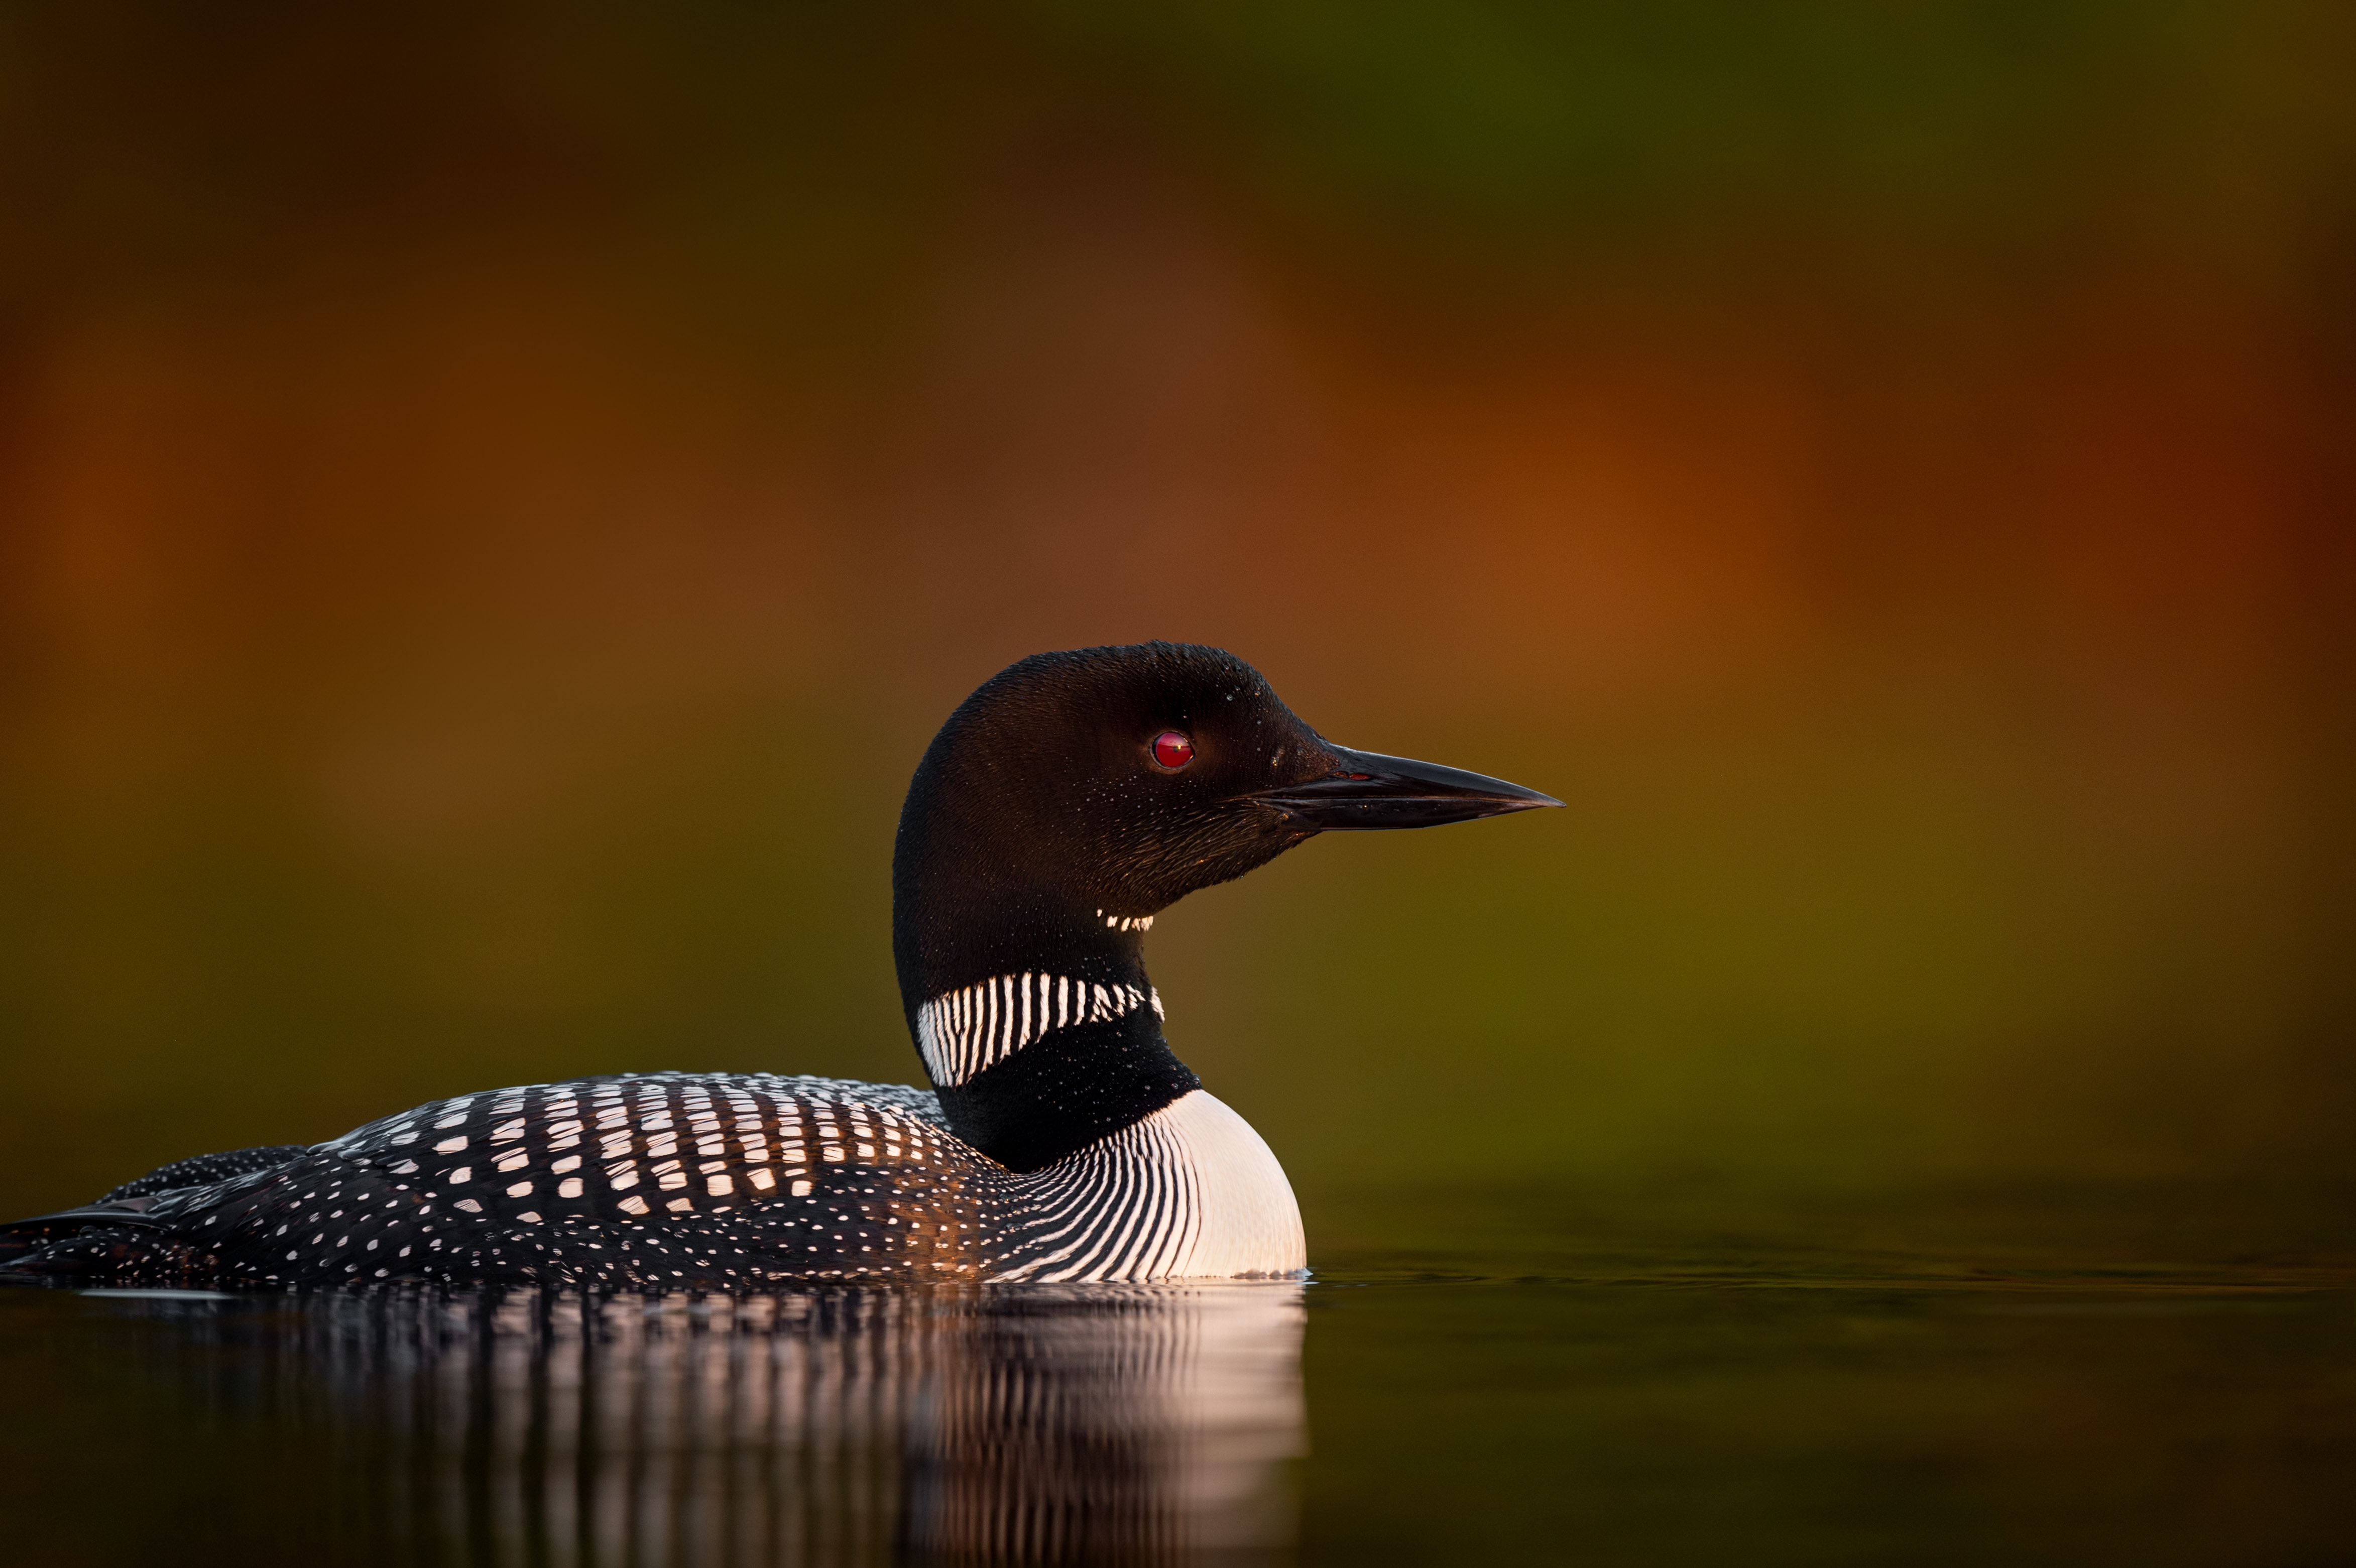 All About Loons